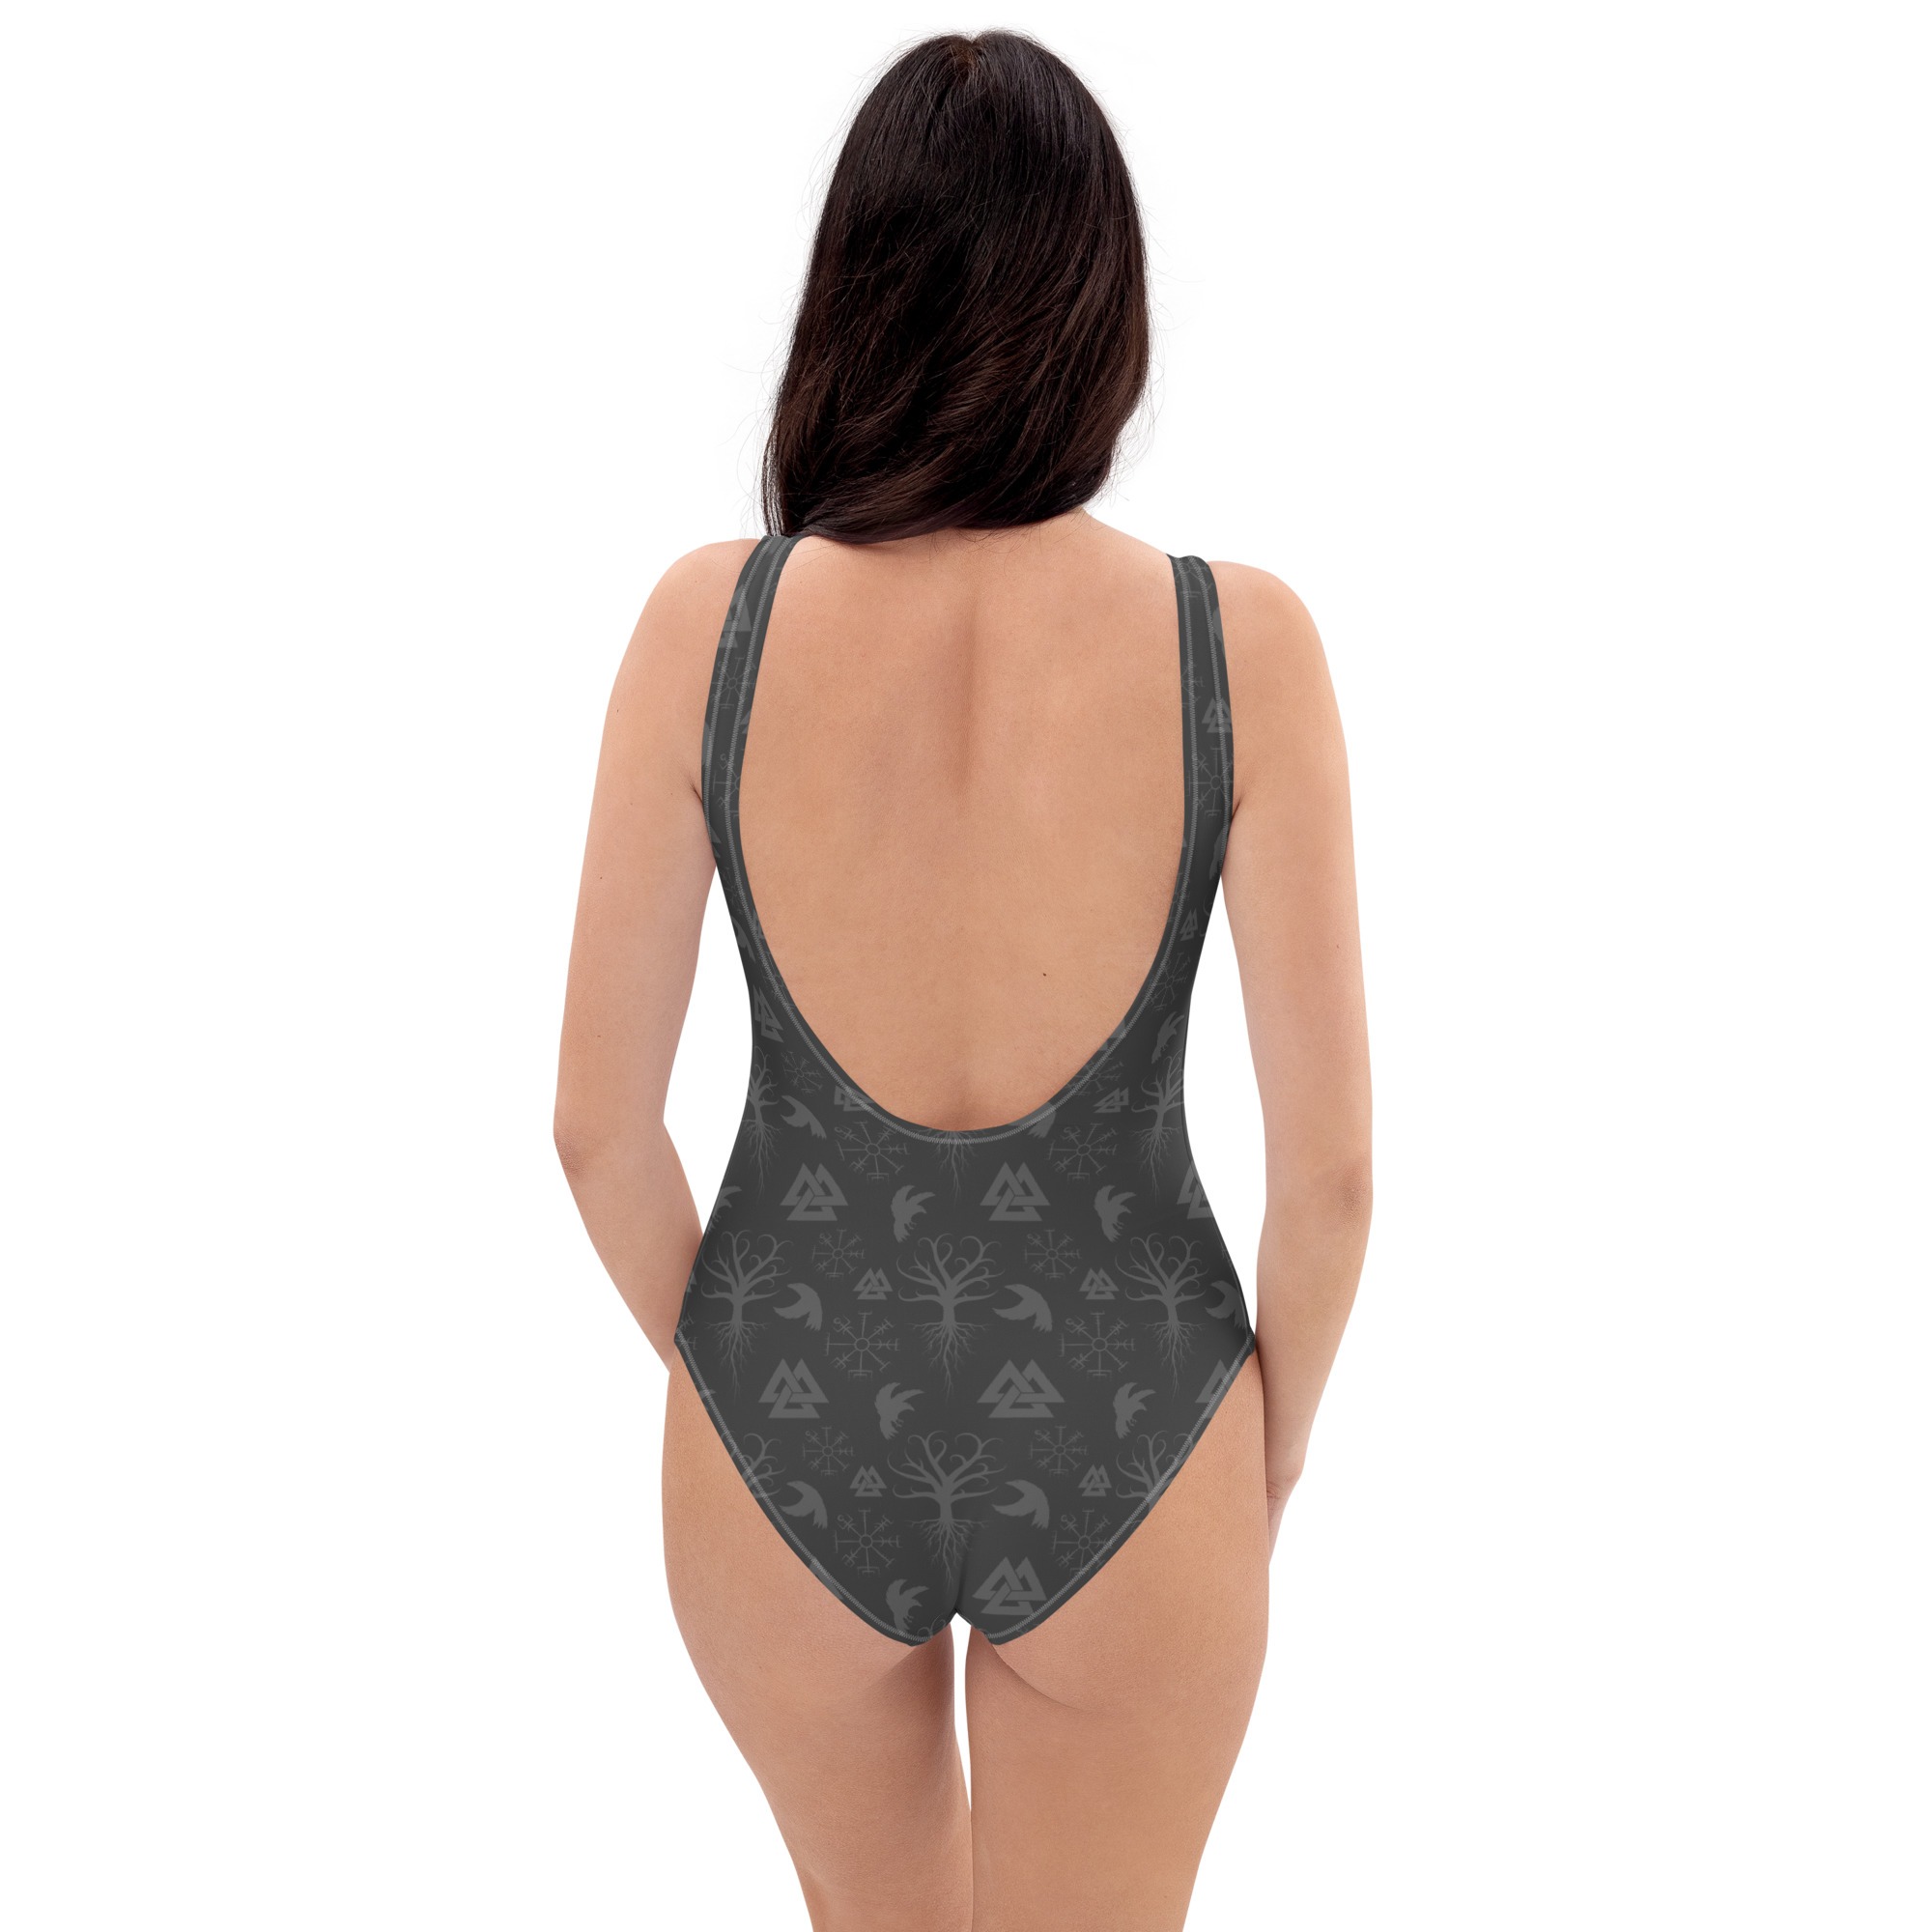 Gray Norse Symbols One-Piece Swimsuit